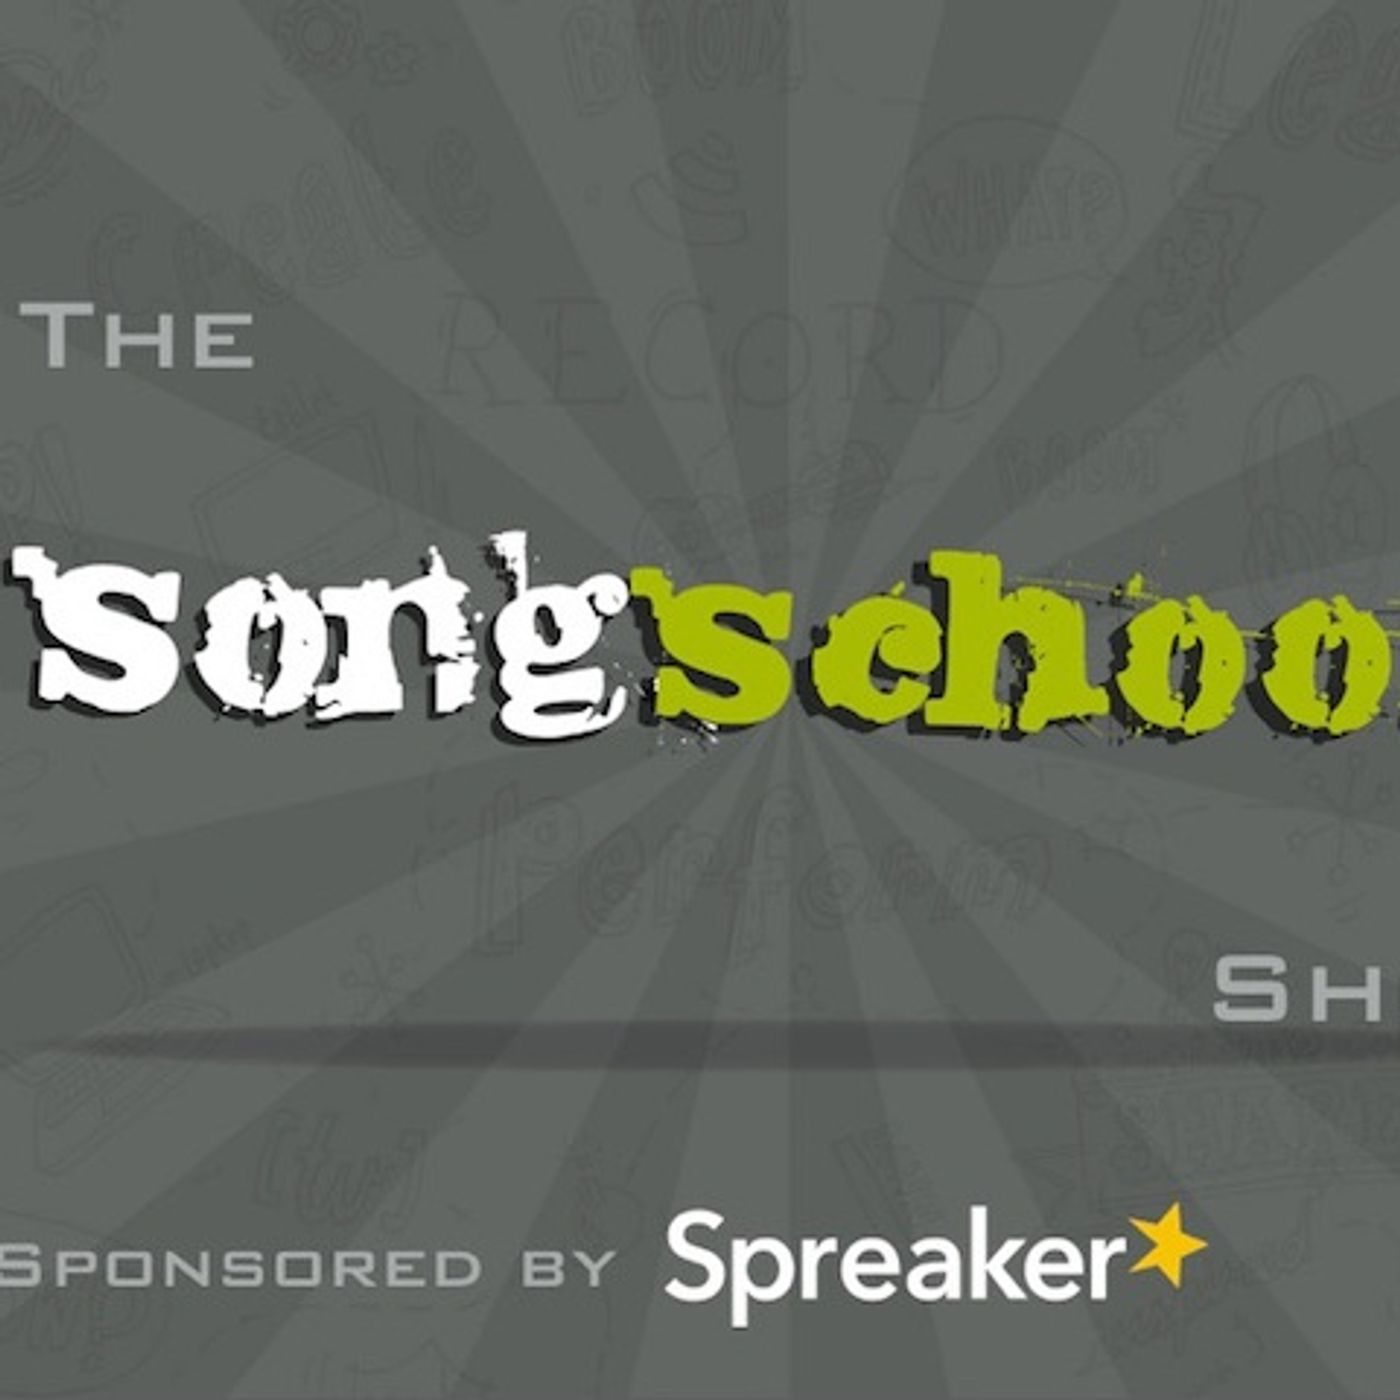 The Songschool Show @ The National Concert Hall 2019